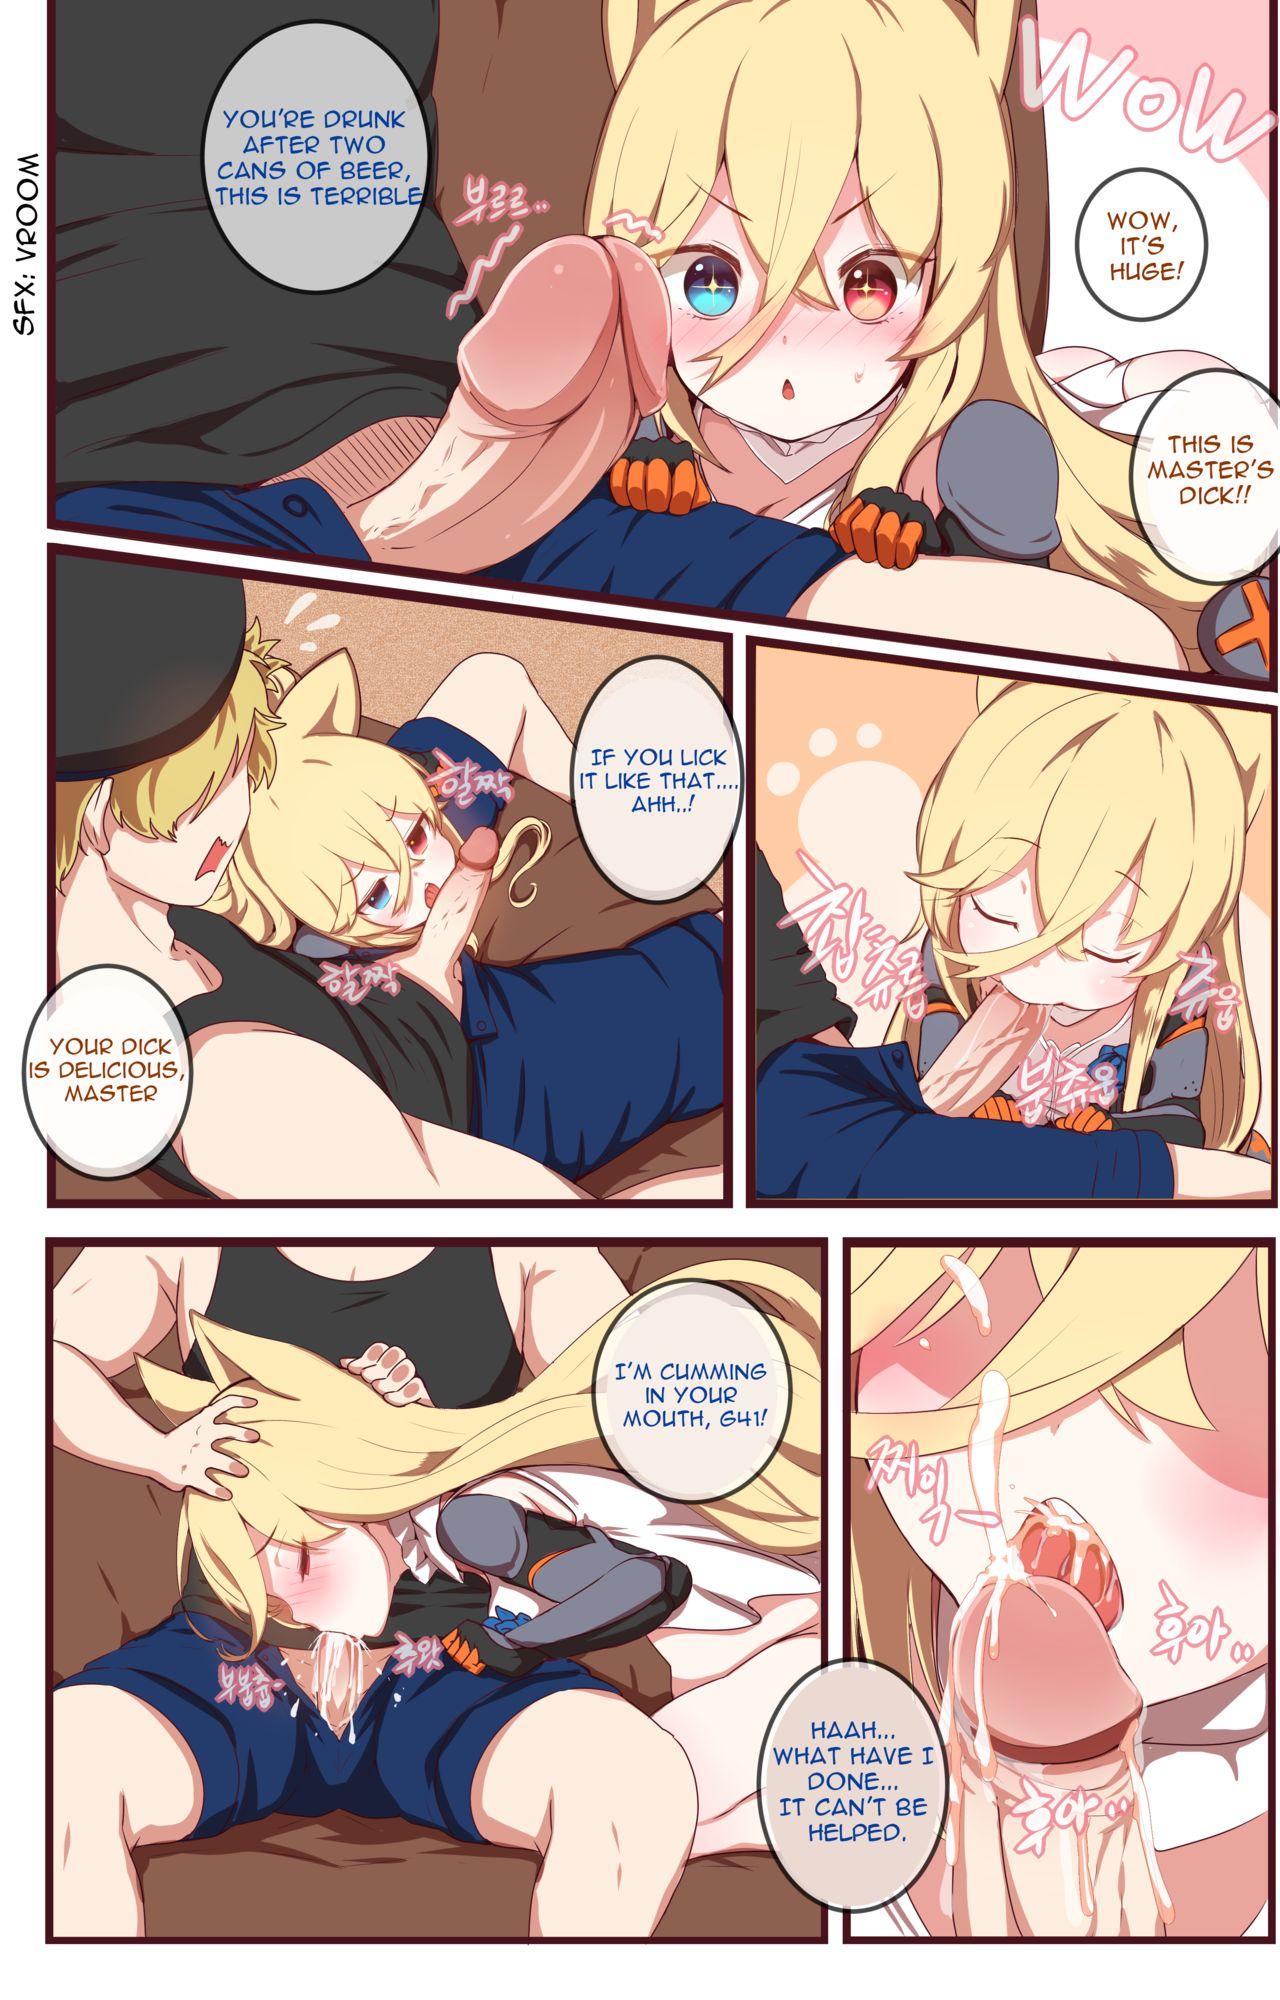 Hot How to use dolls 04 - Girls frontline Girl Fucked Hard - Page 5